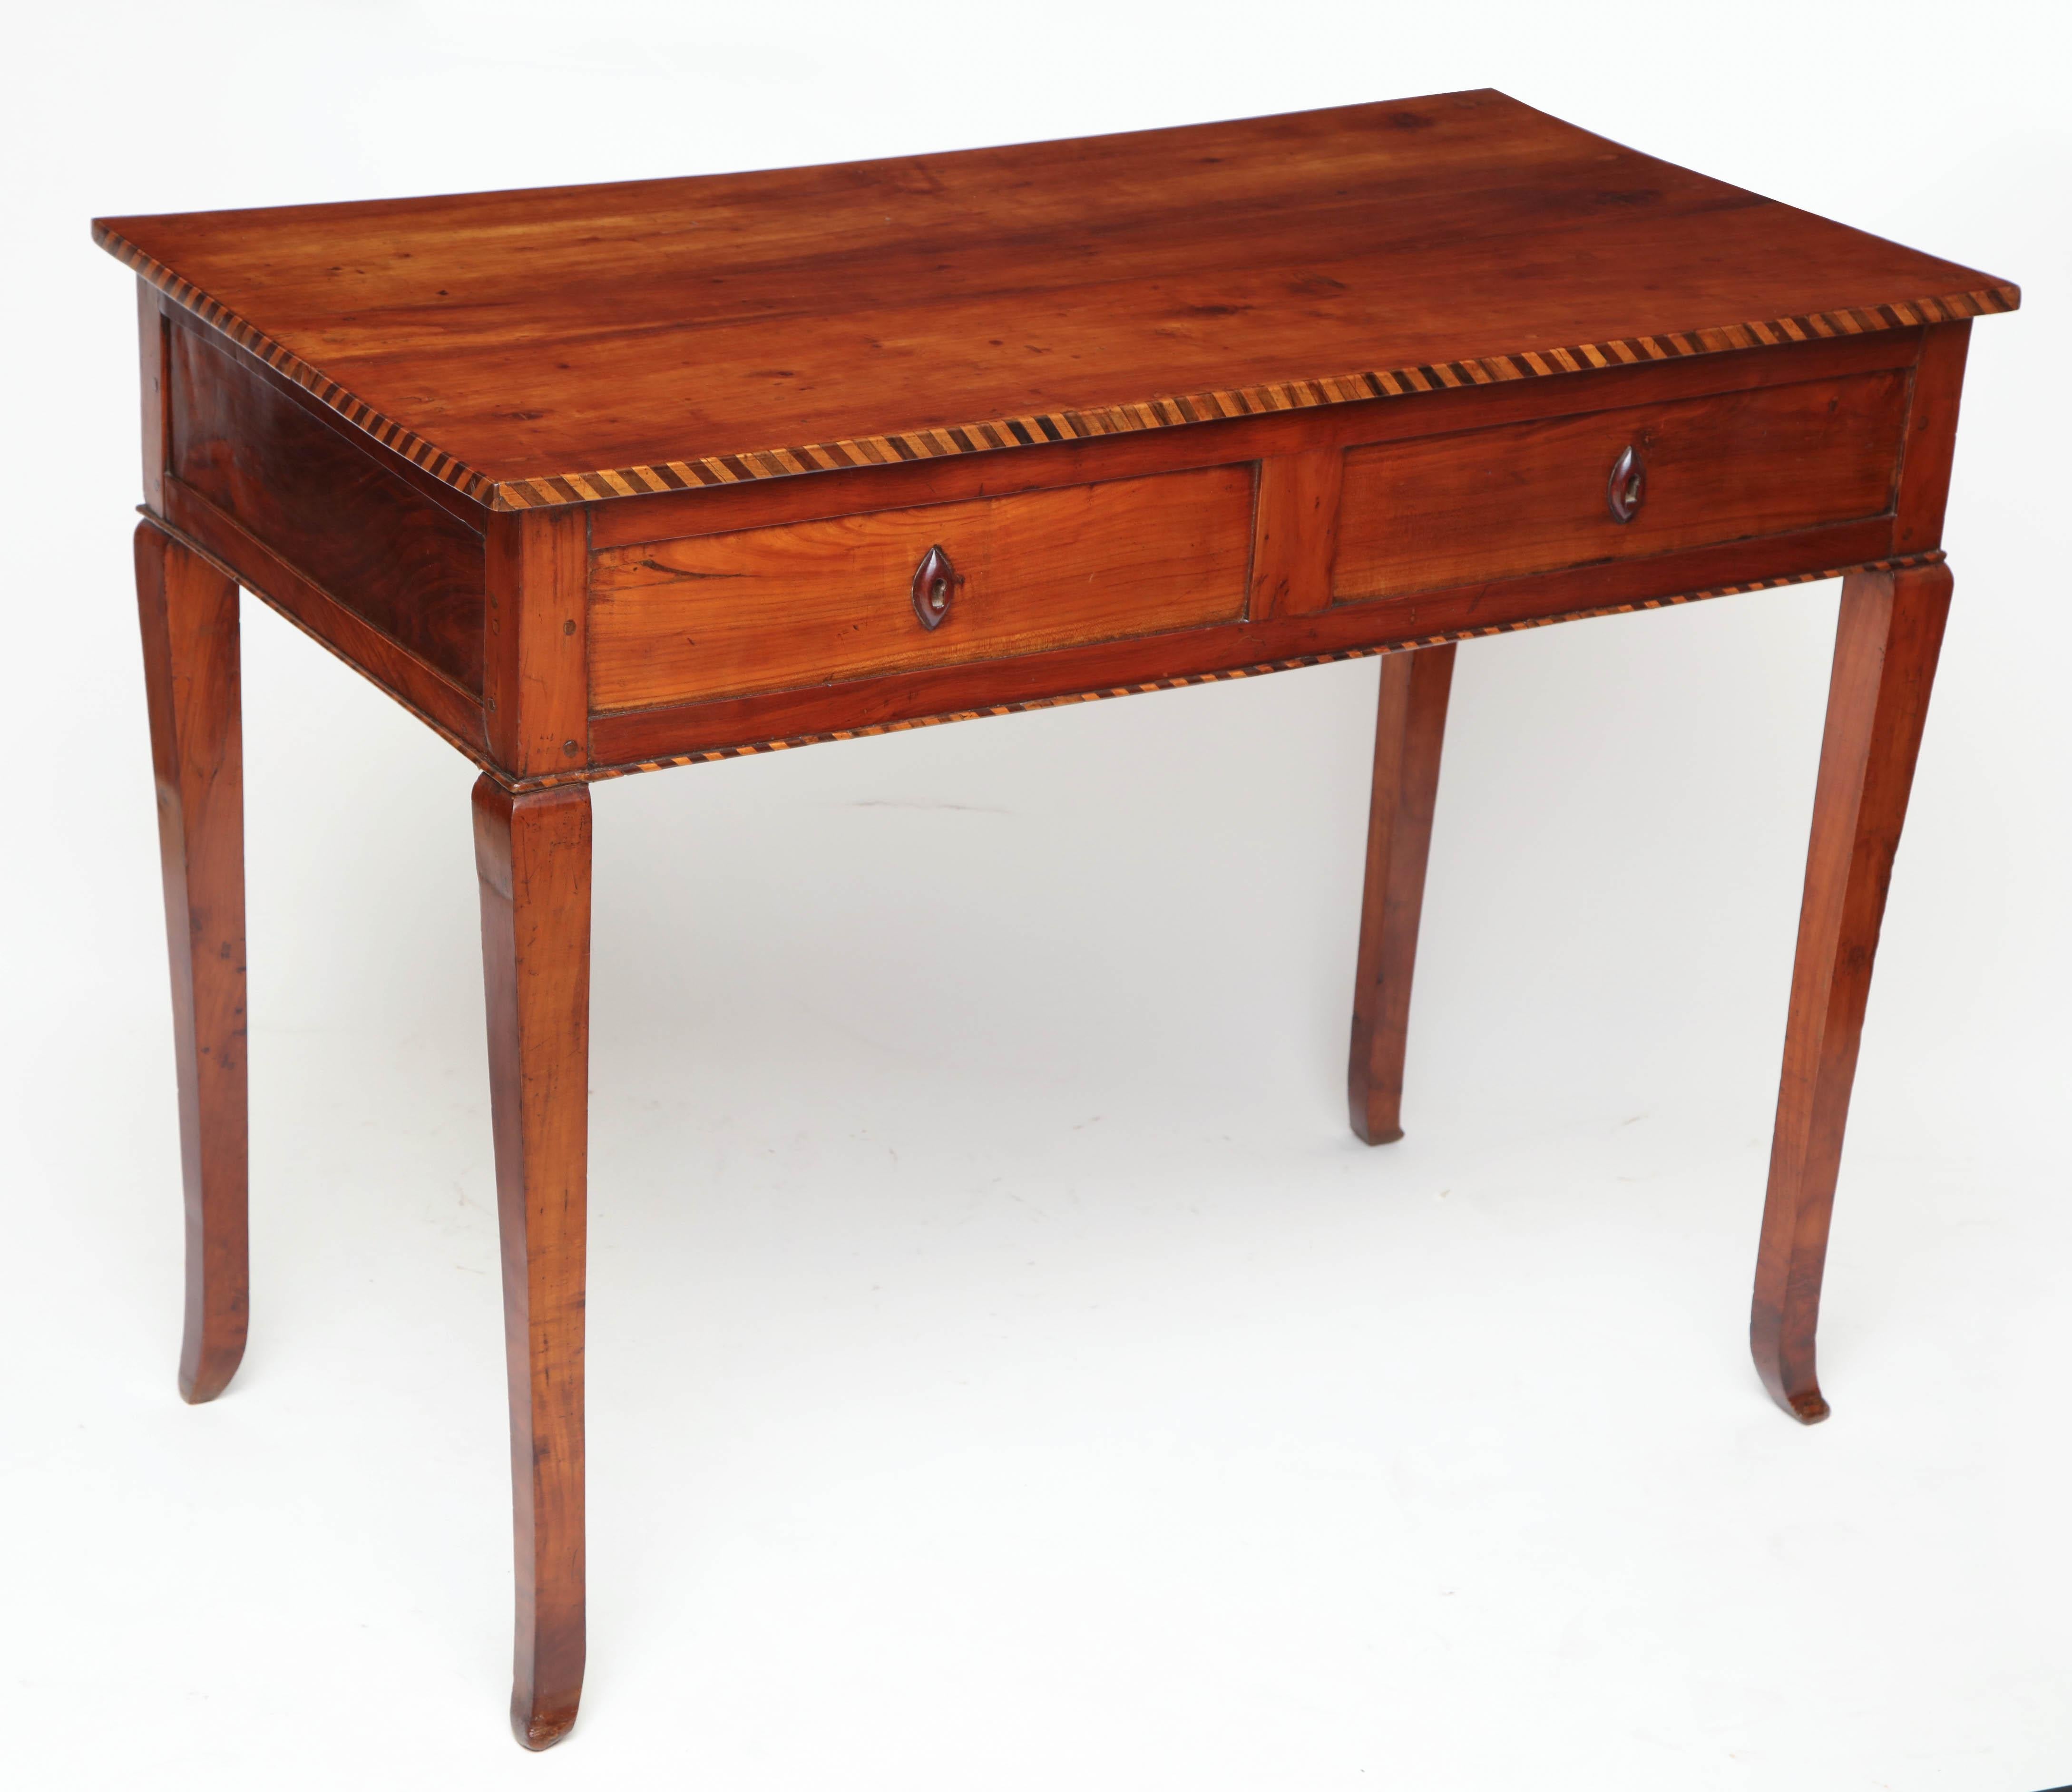 18th Century Italian Cherry Table with Parquetry Border and Two Drawers 10